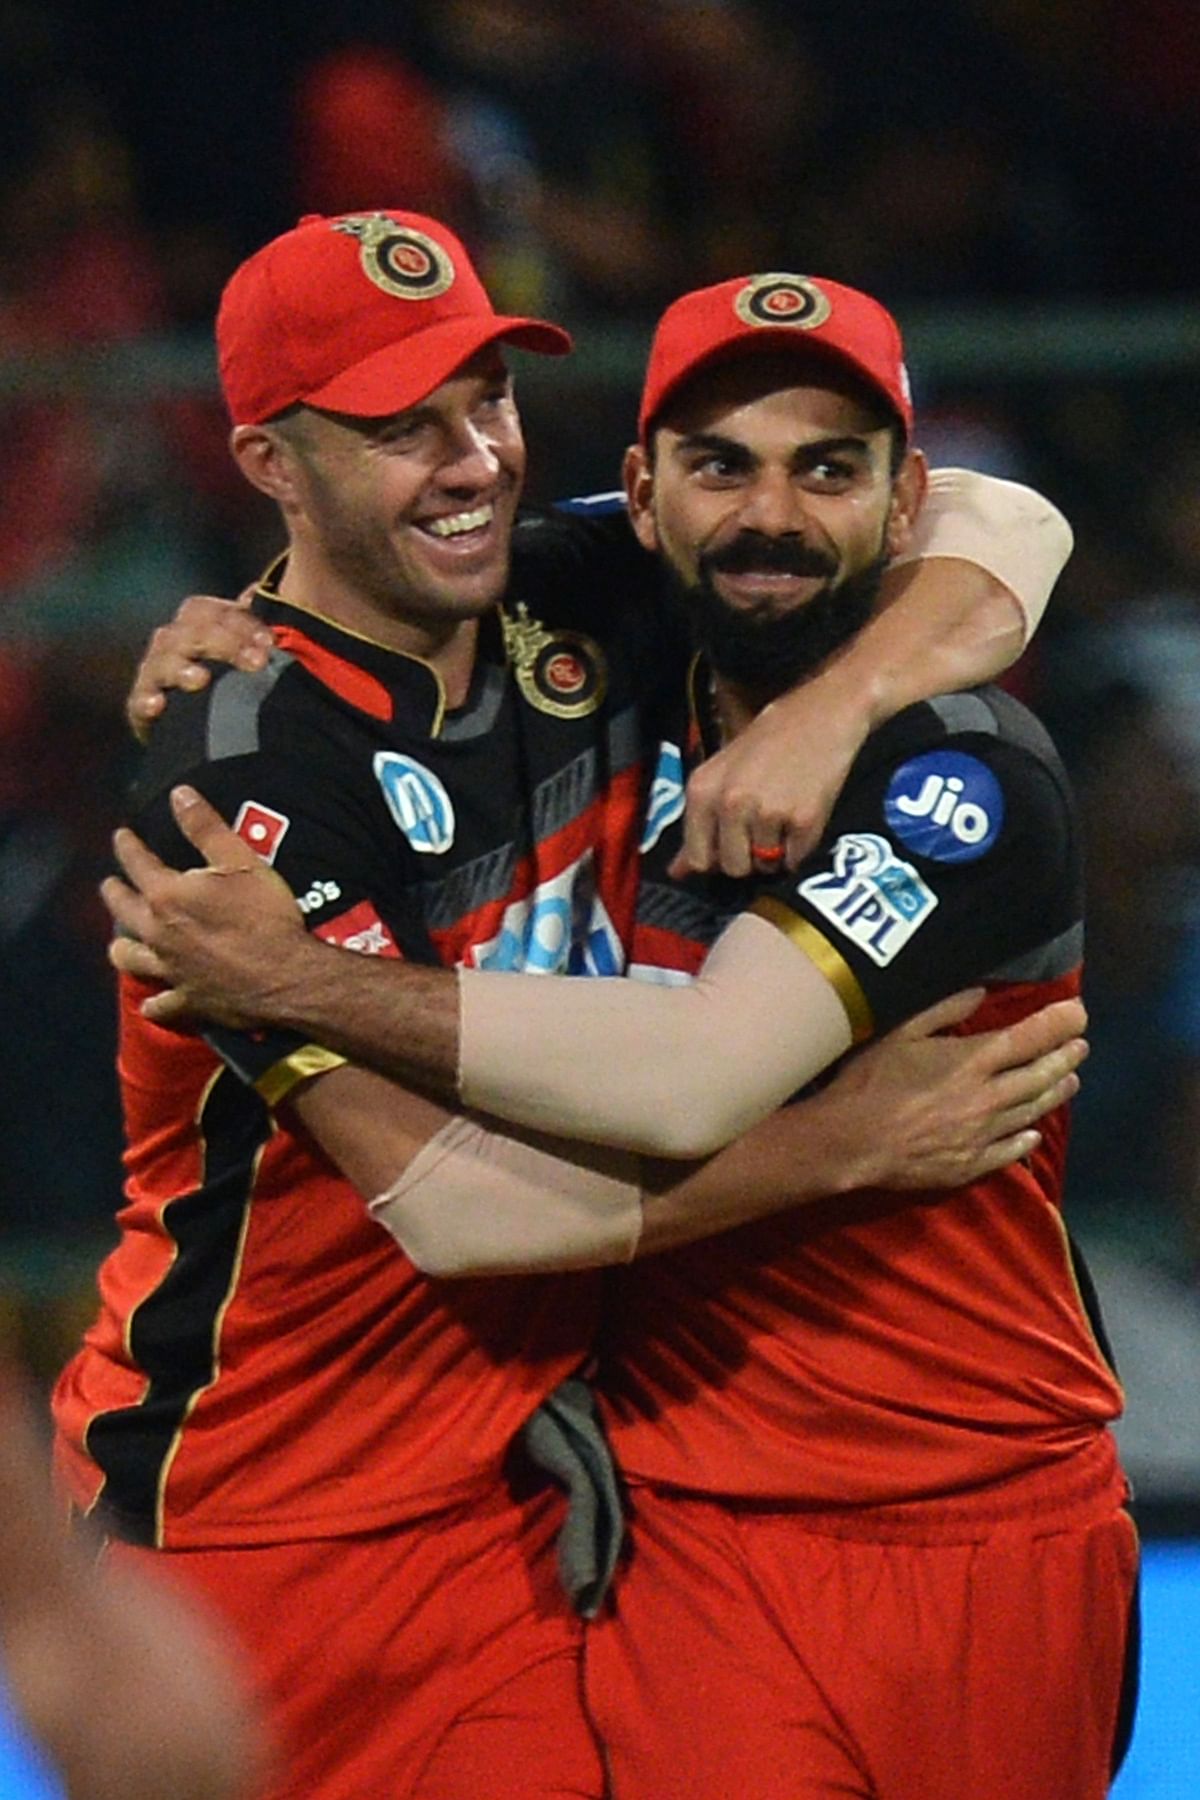 In this file photo taken on 17 May, 2018 Royal Challengers Bangalore captain Virat Kohli (R) and AB De Villiers celebrate the team`s 14 run victory during the 2018 Indian Premier League (IPL) Twenty20 cricket match between Royal Challengers Bangalore and Sunrisers Hyderabad at The M Chinnaswamy Stadium in Bangalore. Photo: AFP